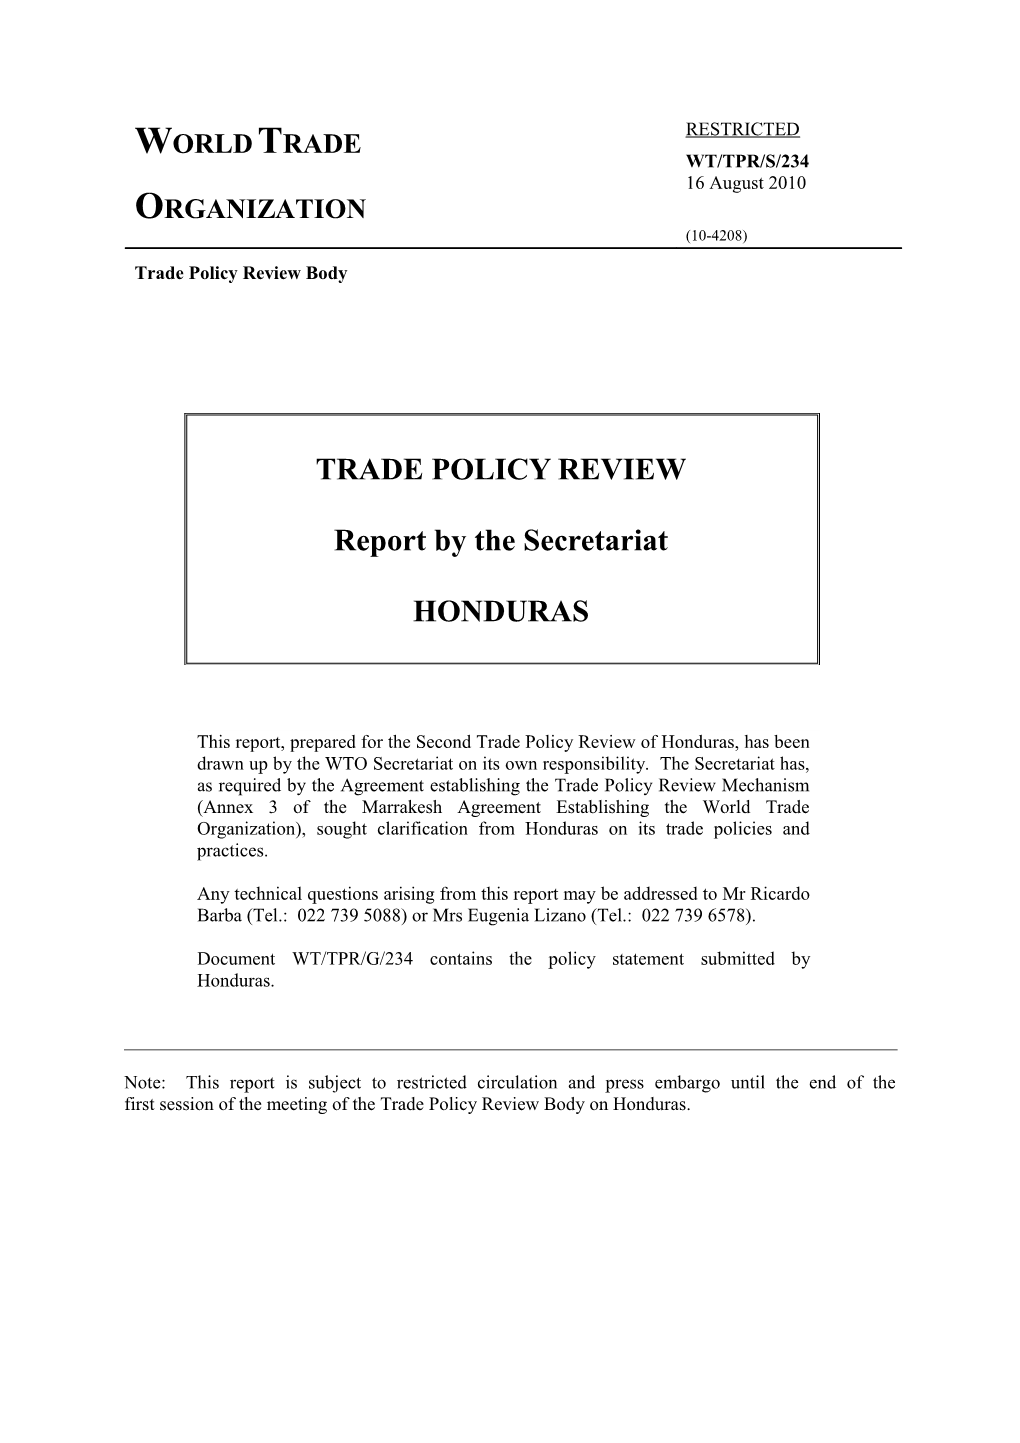 (2) Trade and Investment Policy Framework Viii